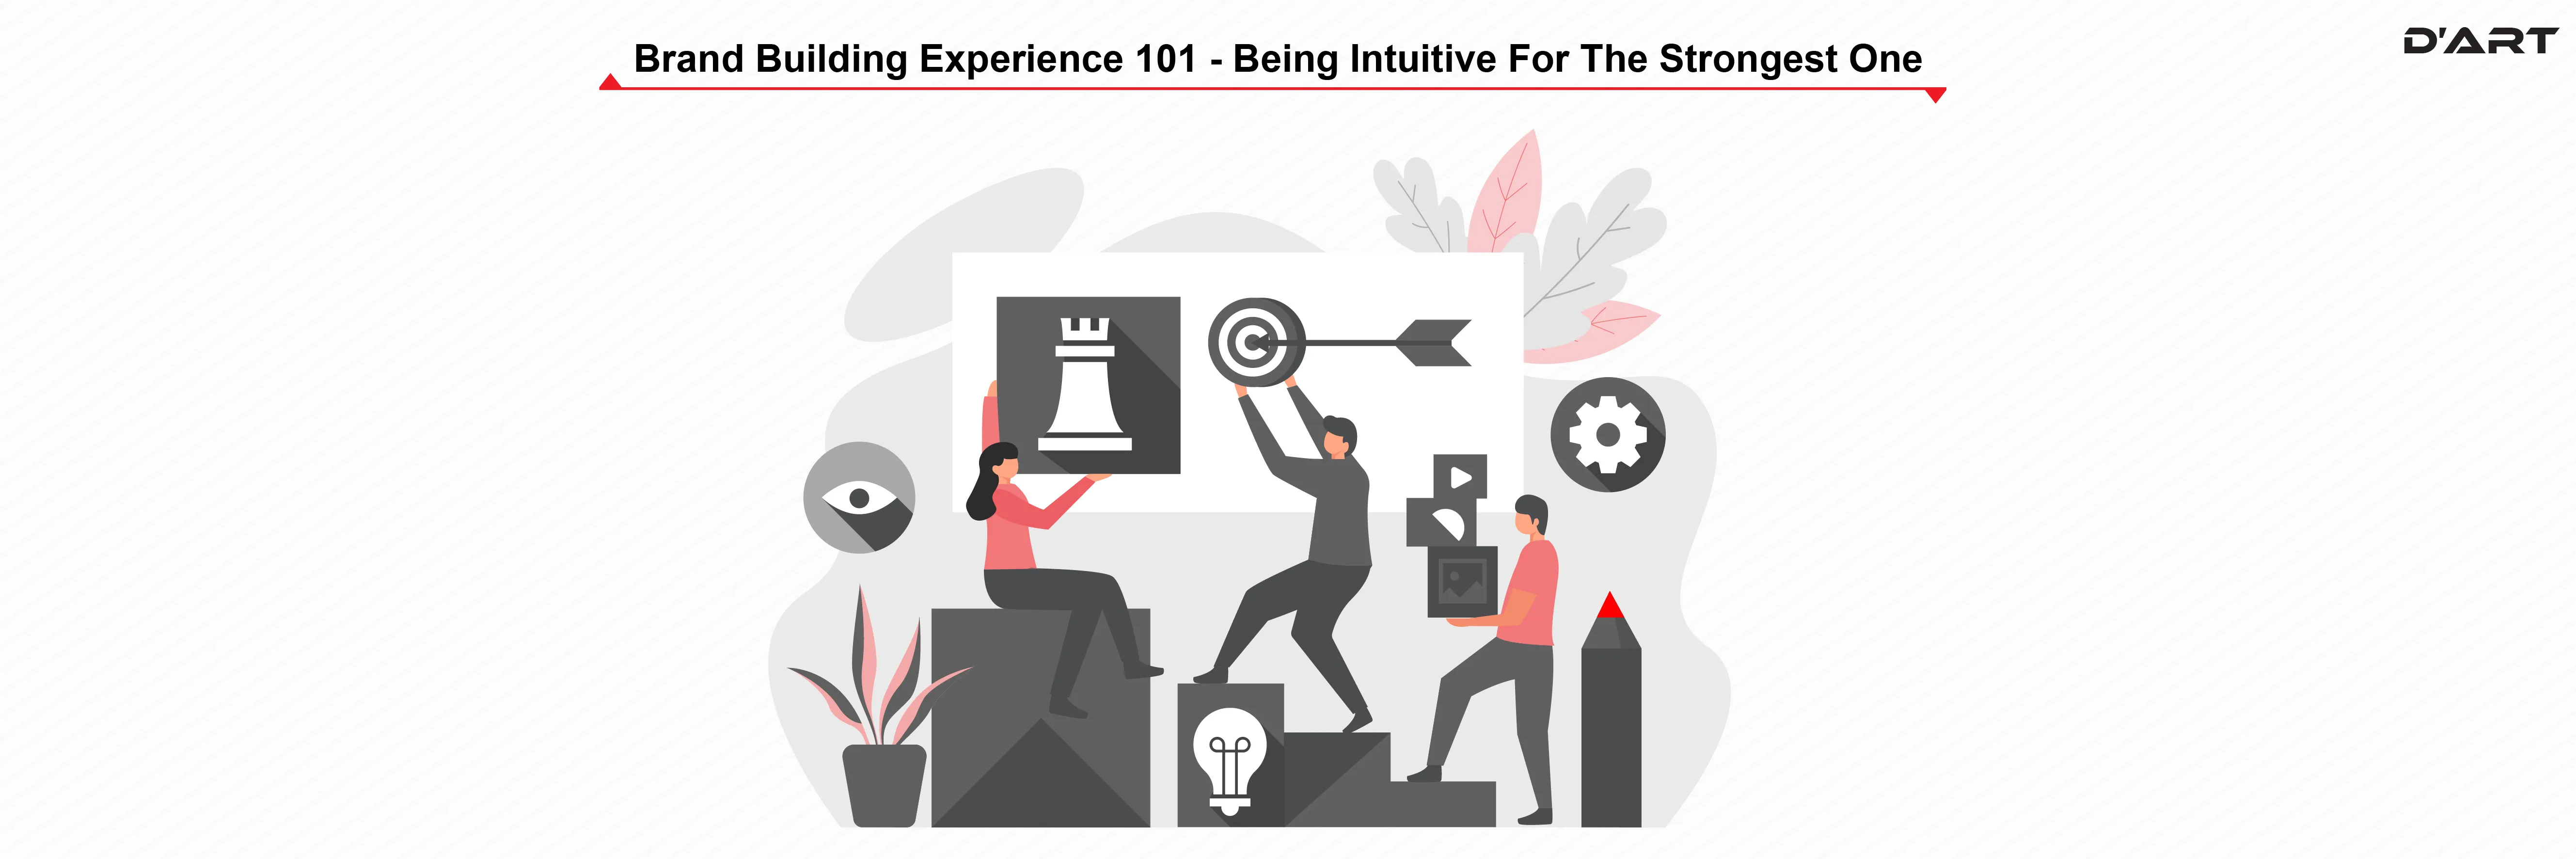 Brand building experience 101 - being intuitive for the strongest one